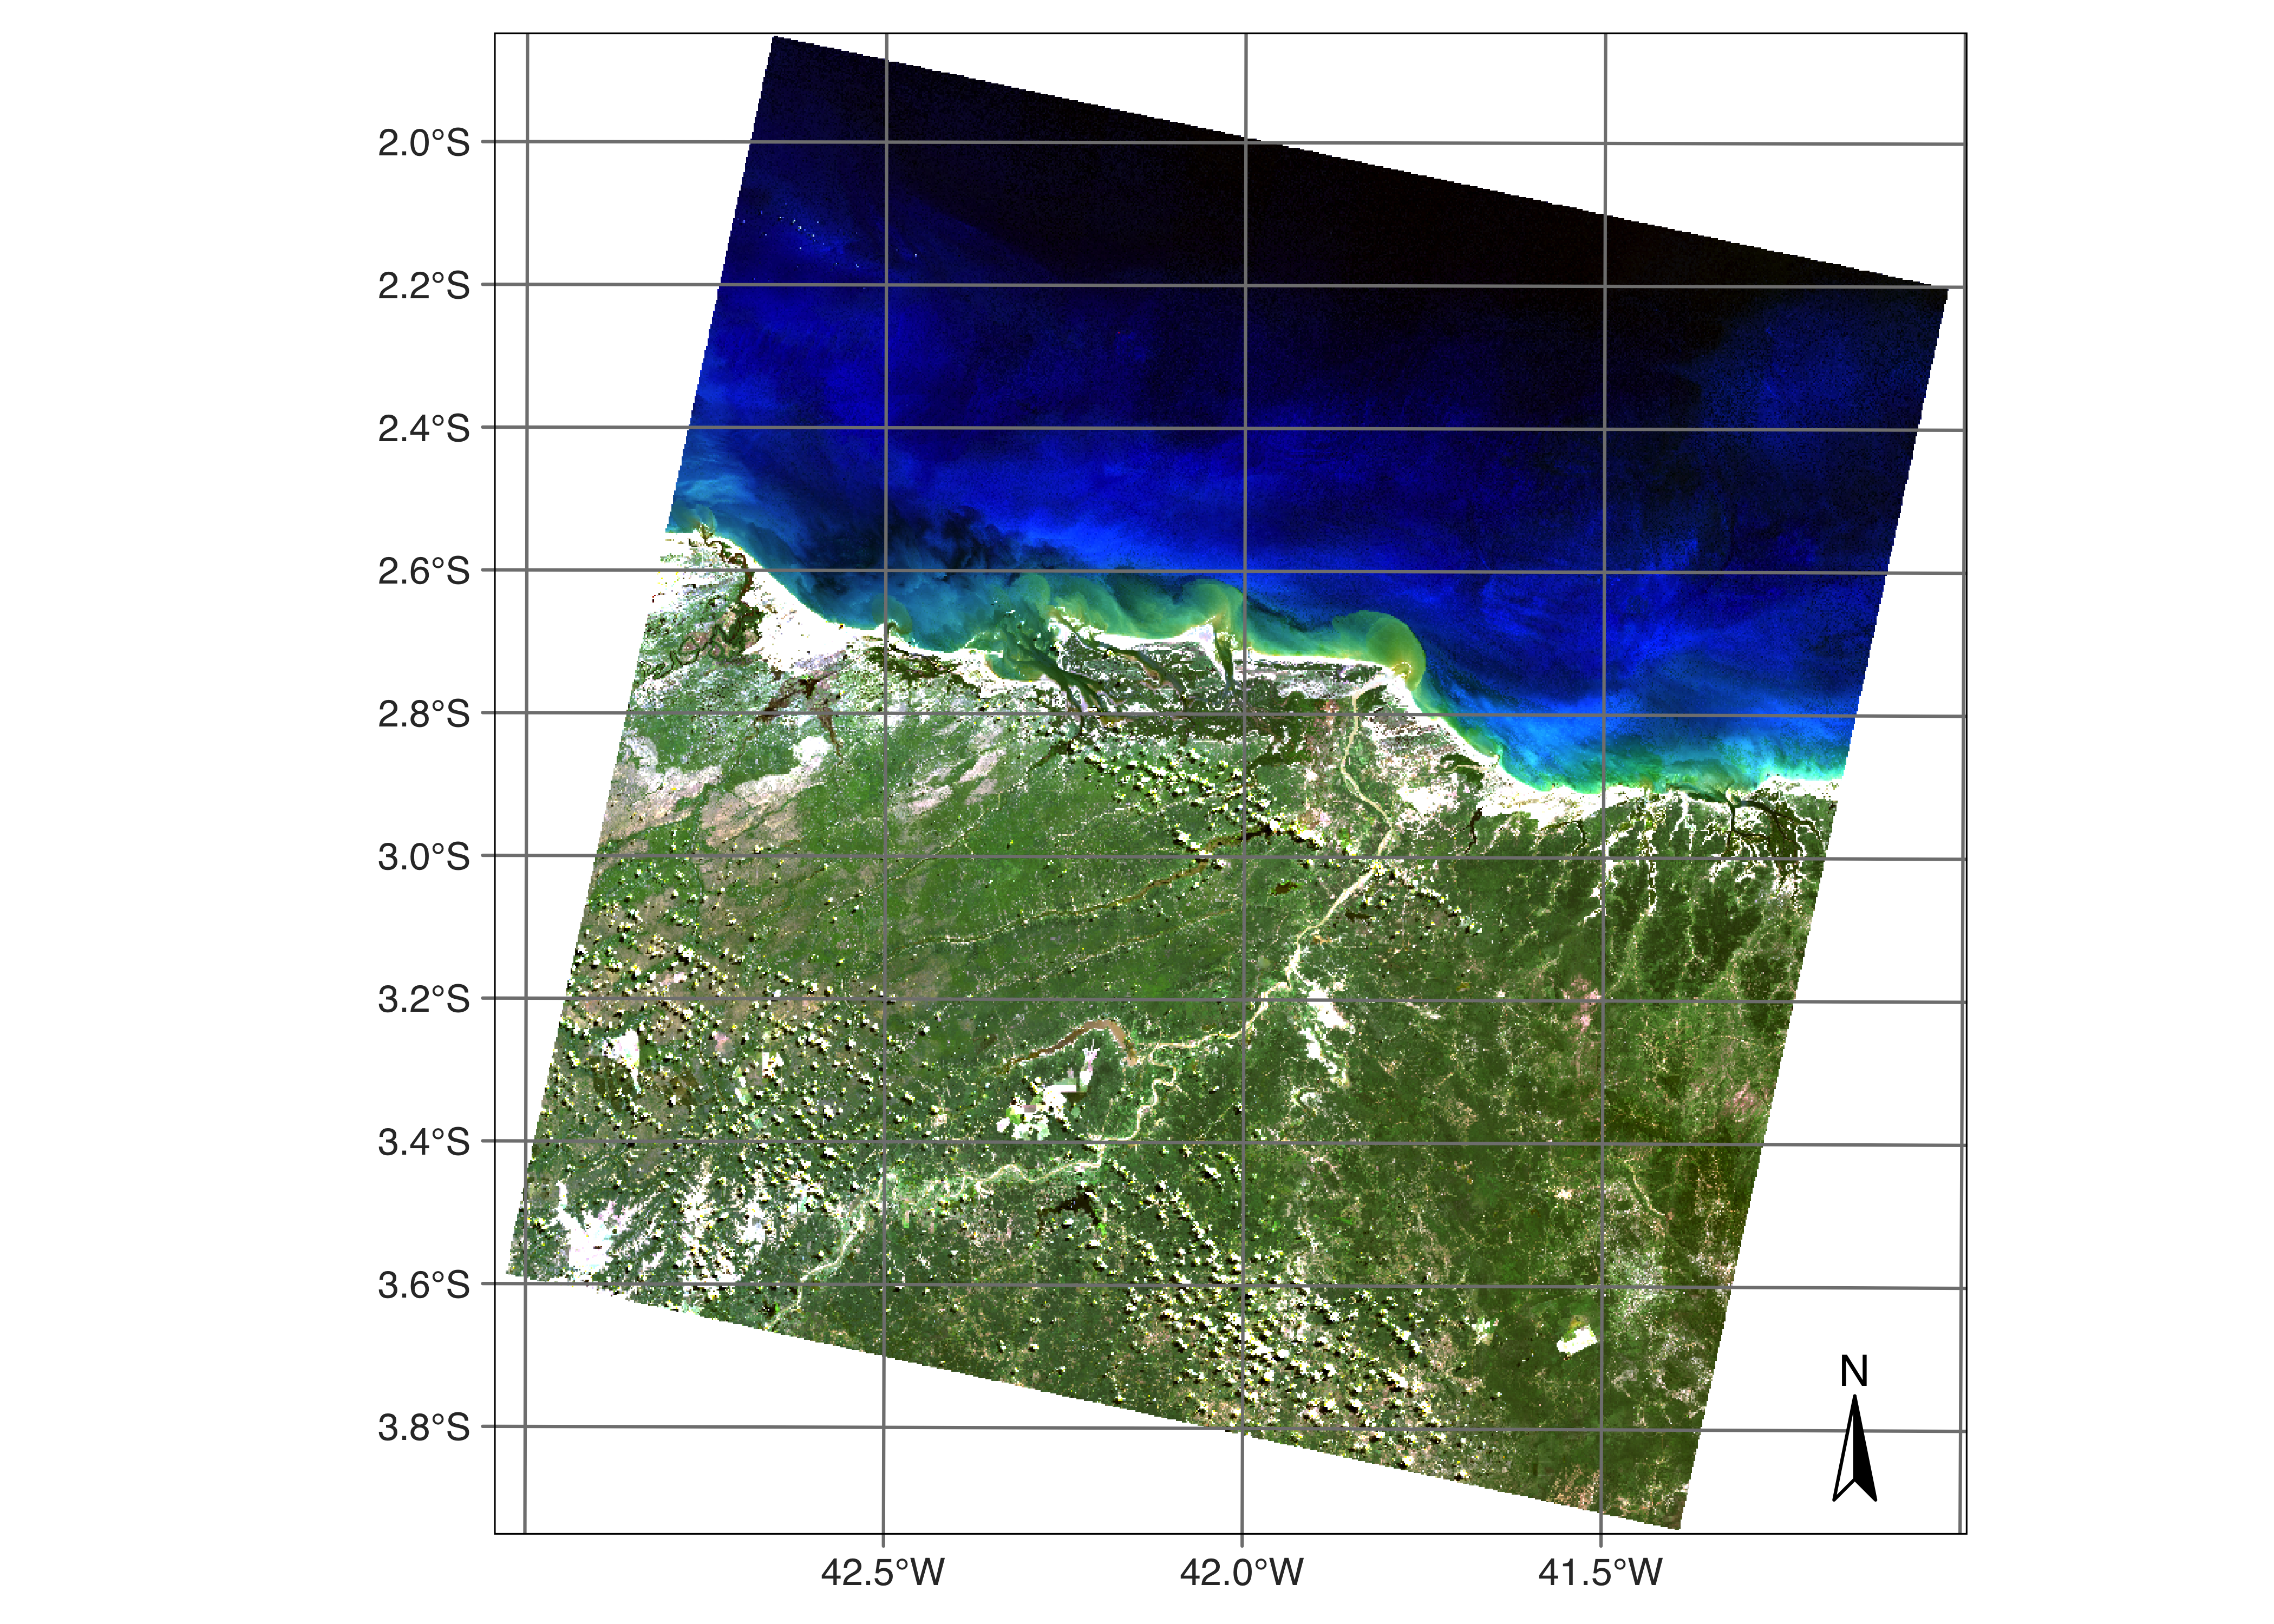 Landsat-8 image in an area in Northeast Brazil (Source: Authors).